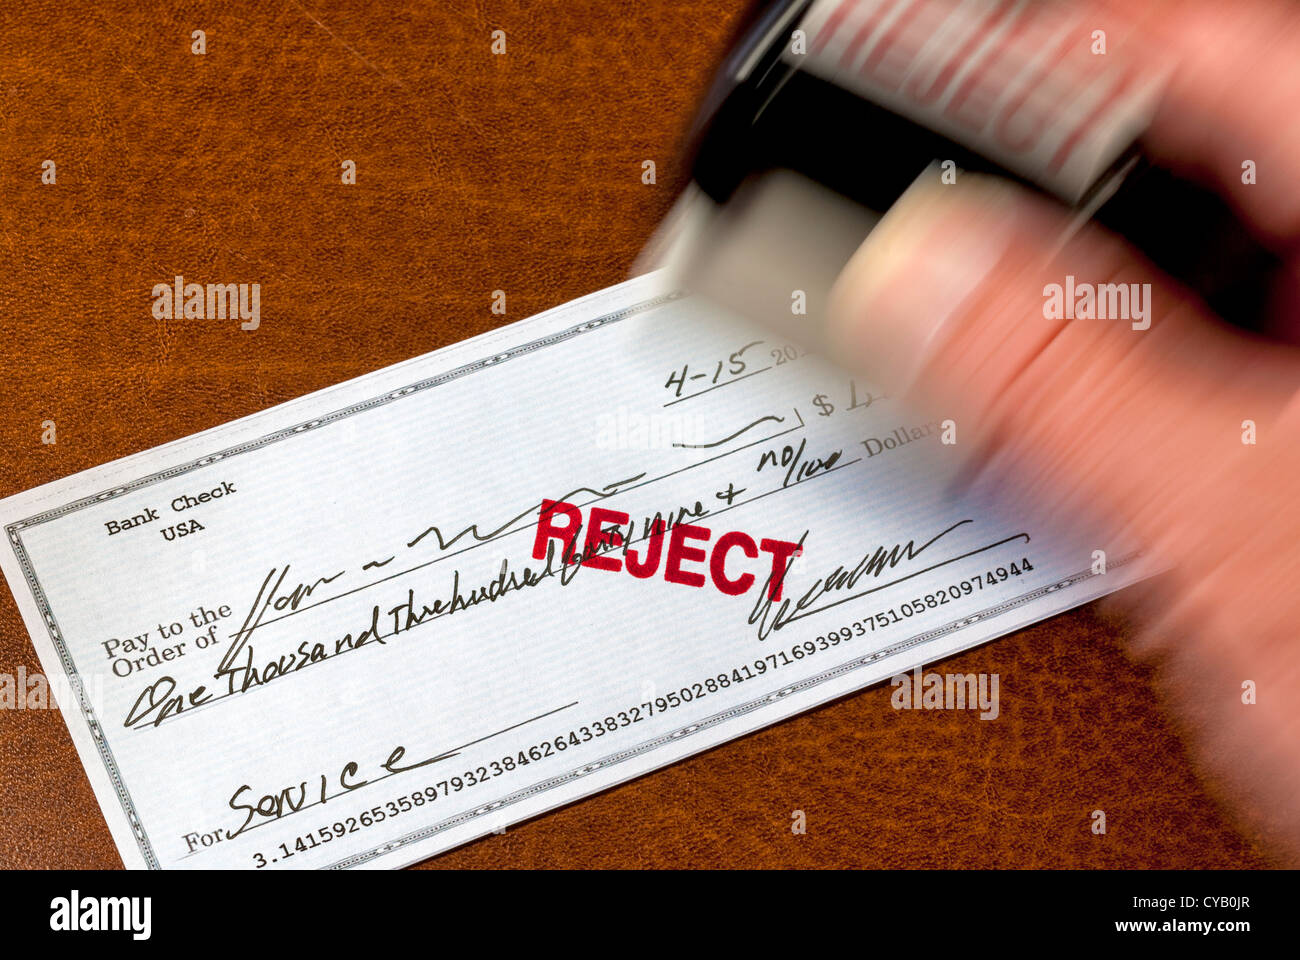 A stamp is used to mark a personal check reject Stock Photo